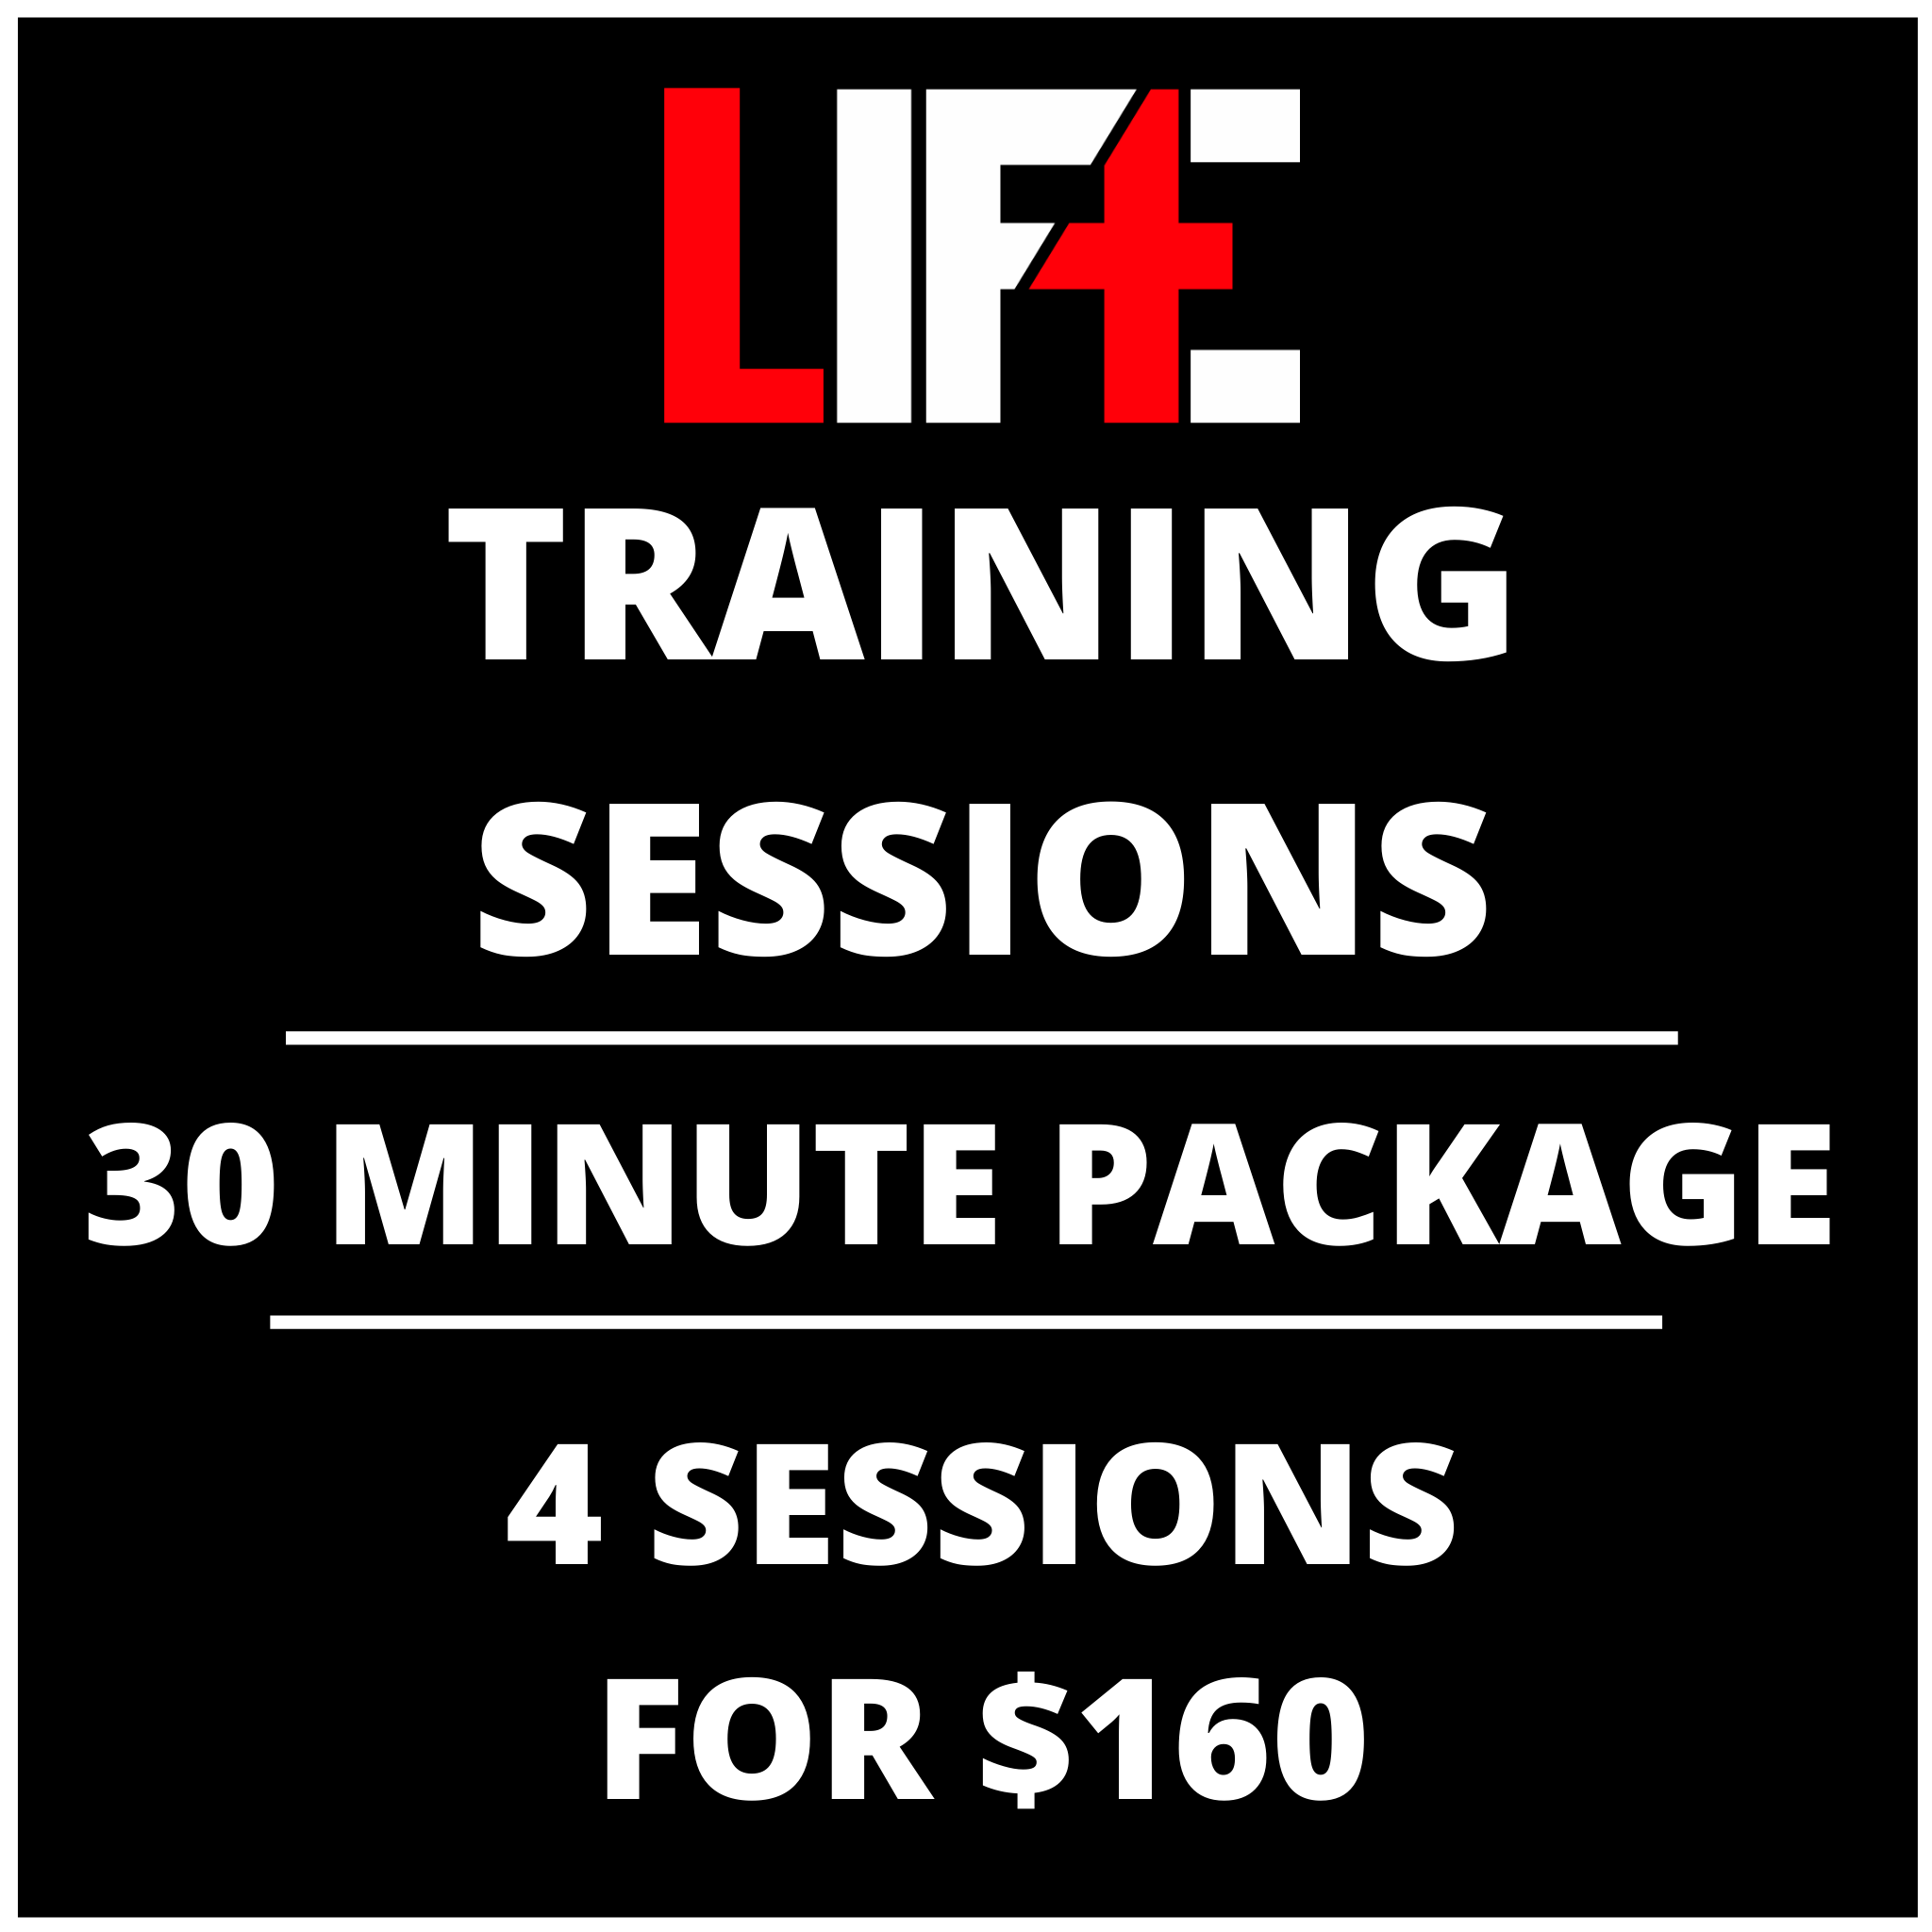 LIFTE Lab Training Sessions (4 x 30 Minutes)